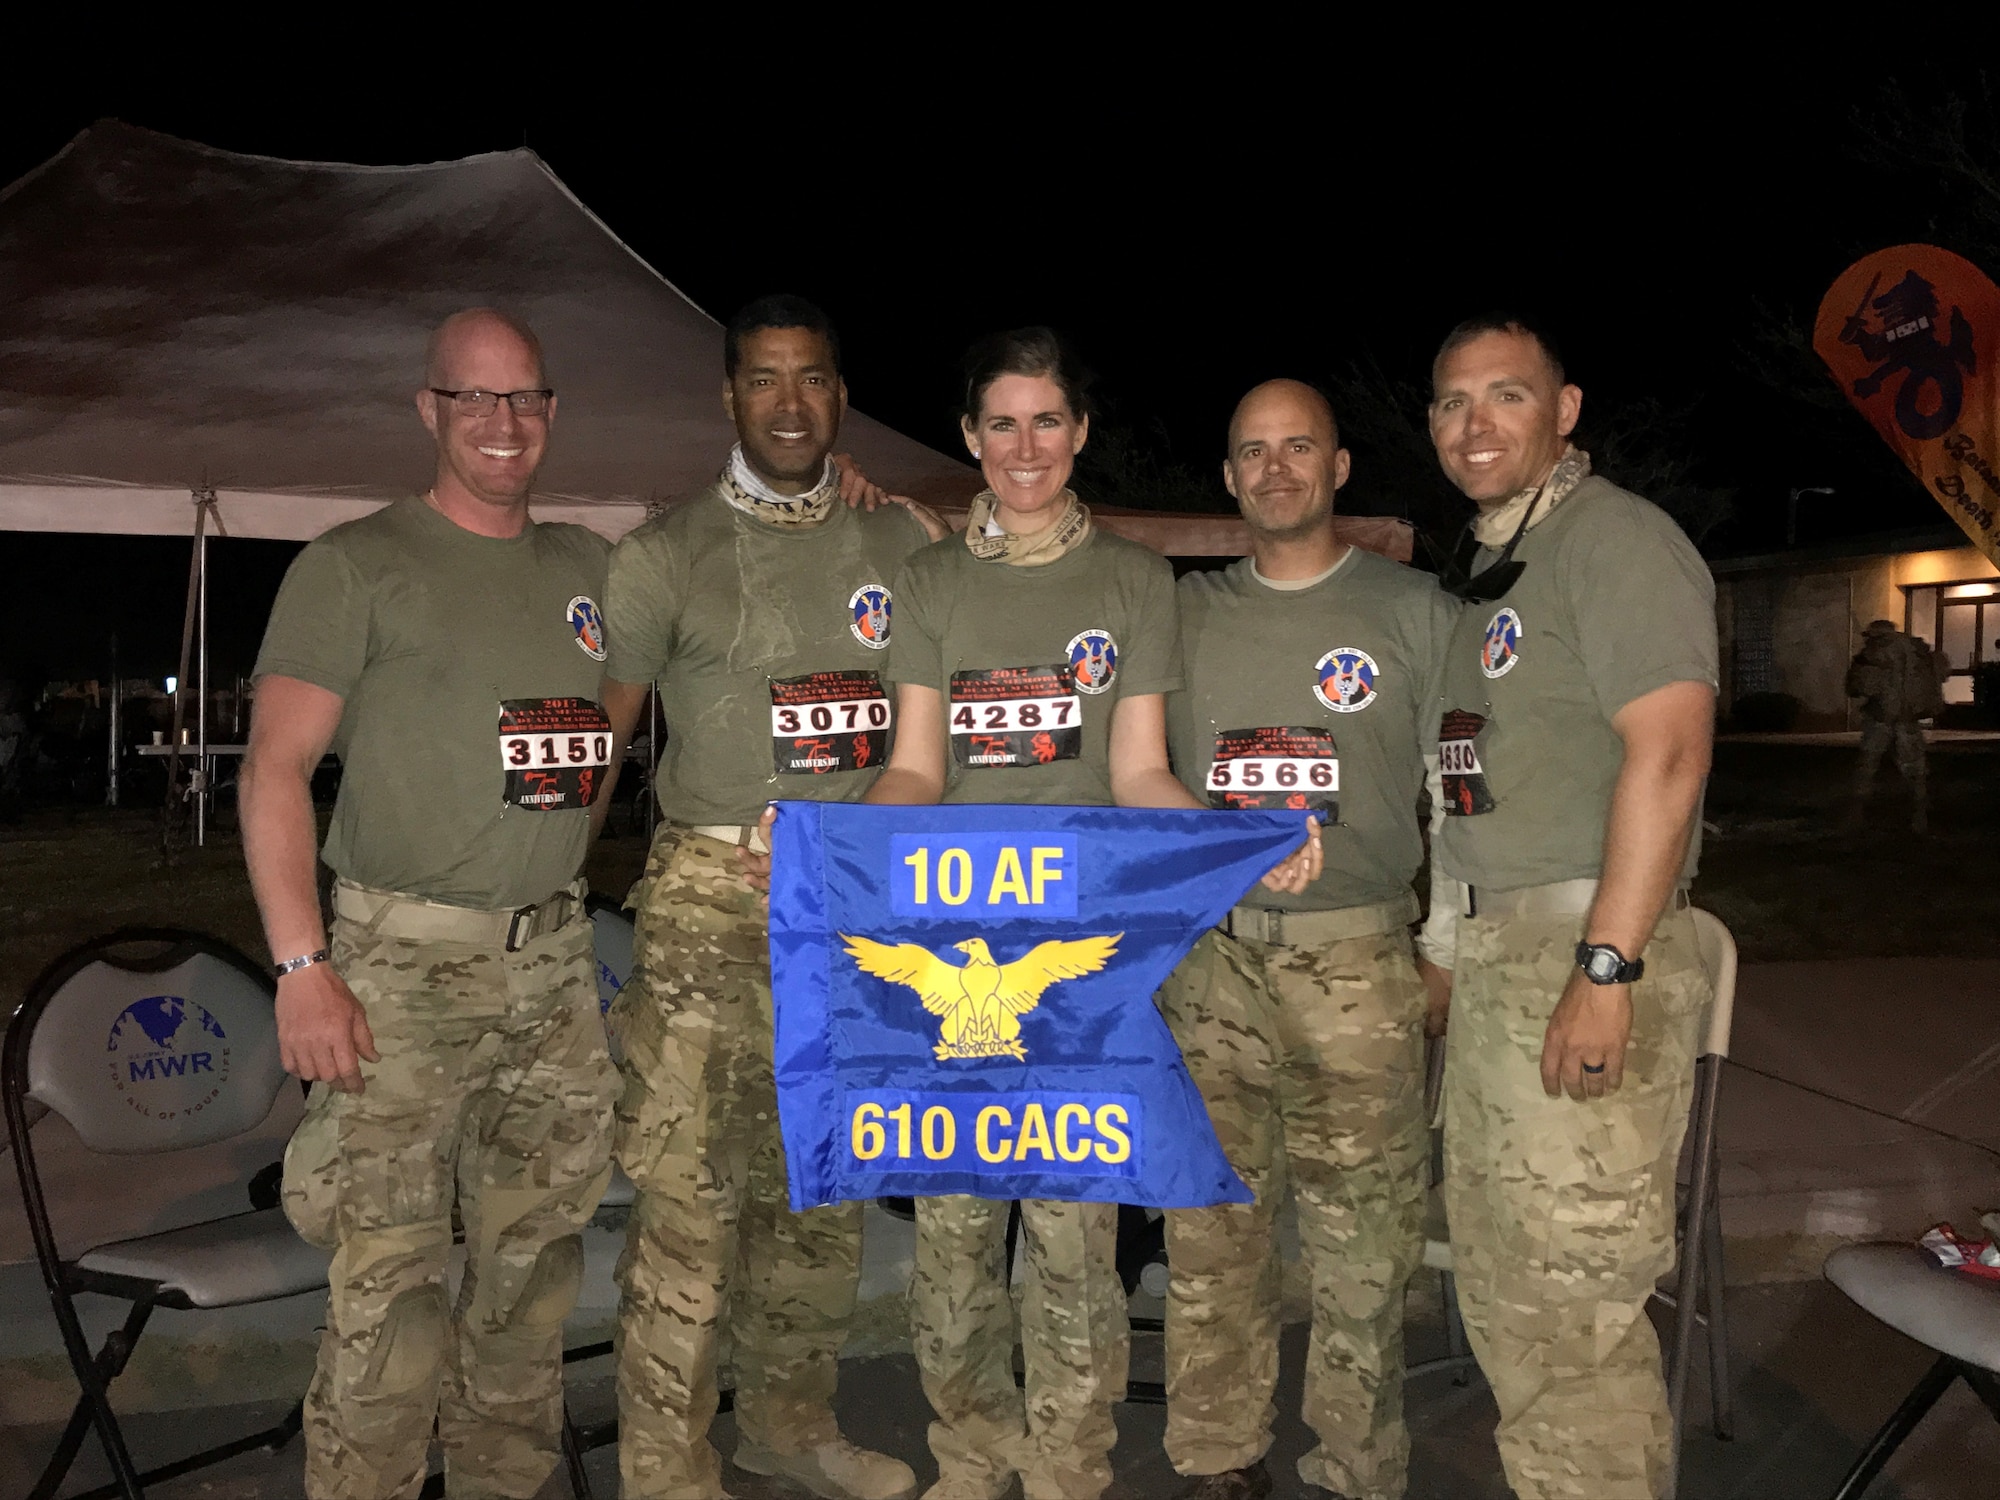 (Left to Right) U.S. Air Force Reservists, Master Sgt. John Herrick, 39, who has completed three other marathons; Staff Sgt. Tyrone Hawkins, 47, an avid cyclist; 2nd Lt. Amber Schoenberger, a direct descendent of a Bataan Death March survivor; Tech. Sgt. Delbert Templeton, 36, a prior Marine; and Tech. Sgt. Trevor Petersma, 39, who completed the Air Force half marathon while deployed in Iraq in 2008, all members of the 610th Command and Control Squadron, pose behind their unit guidon after completing the Bataan Memorial Death March Marathon March 19 at White Sands Missile Range, NM. (Courtesy photo)